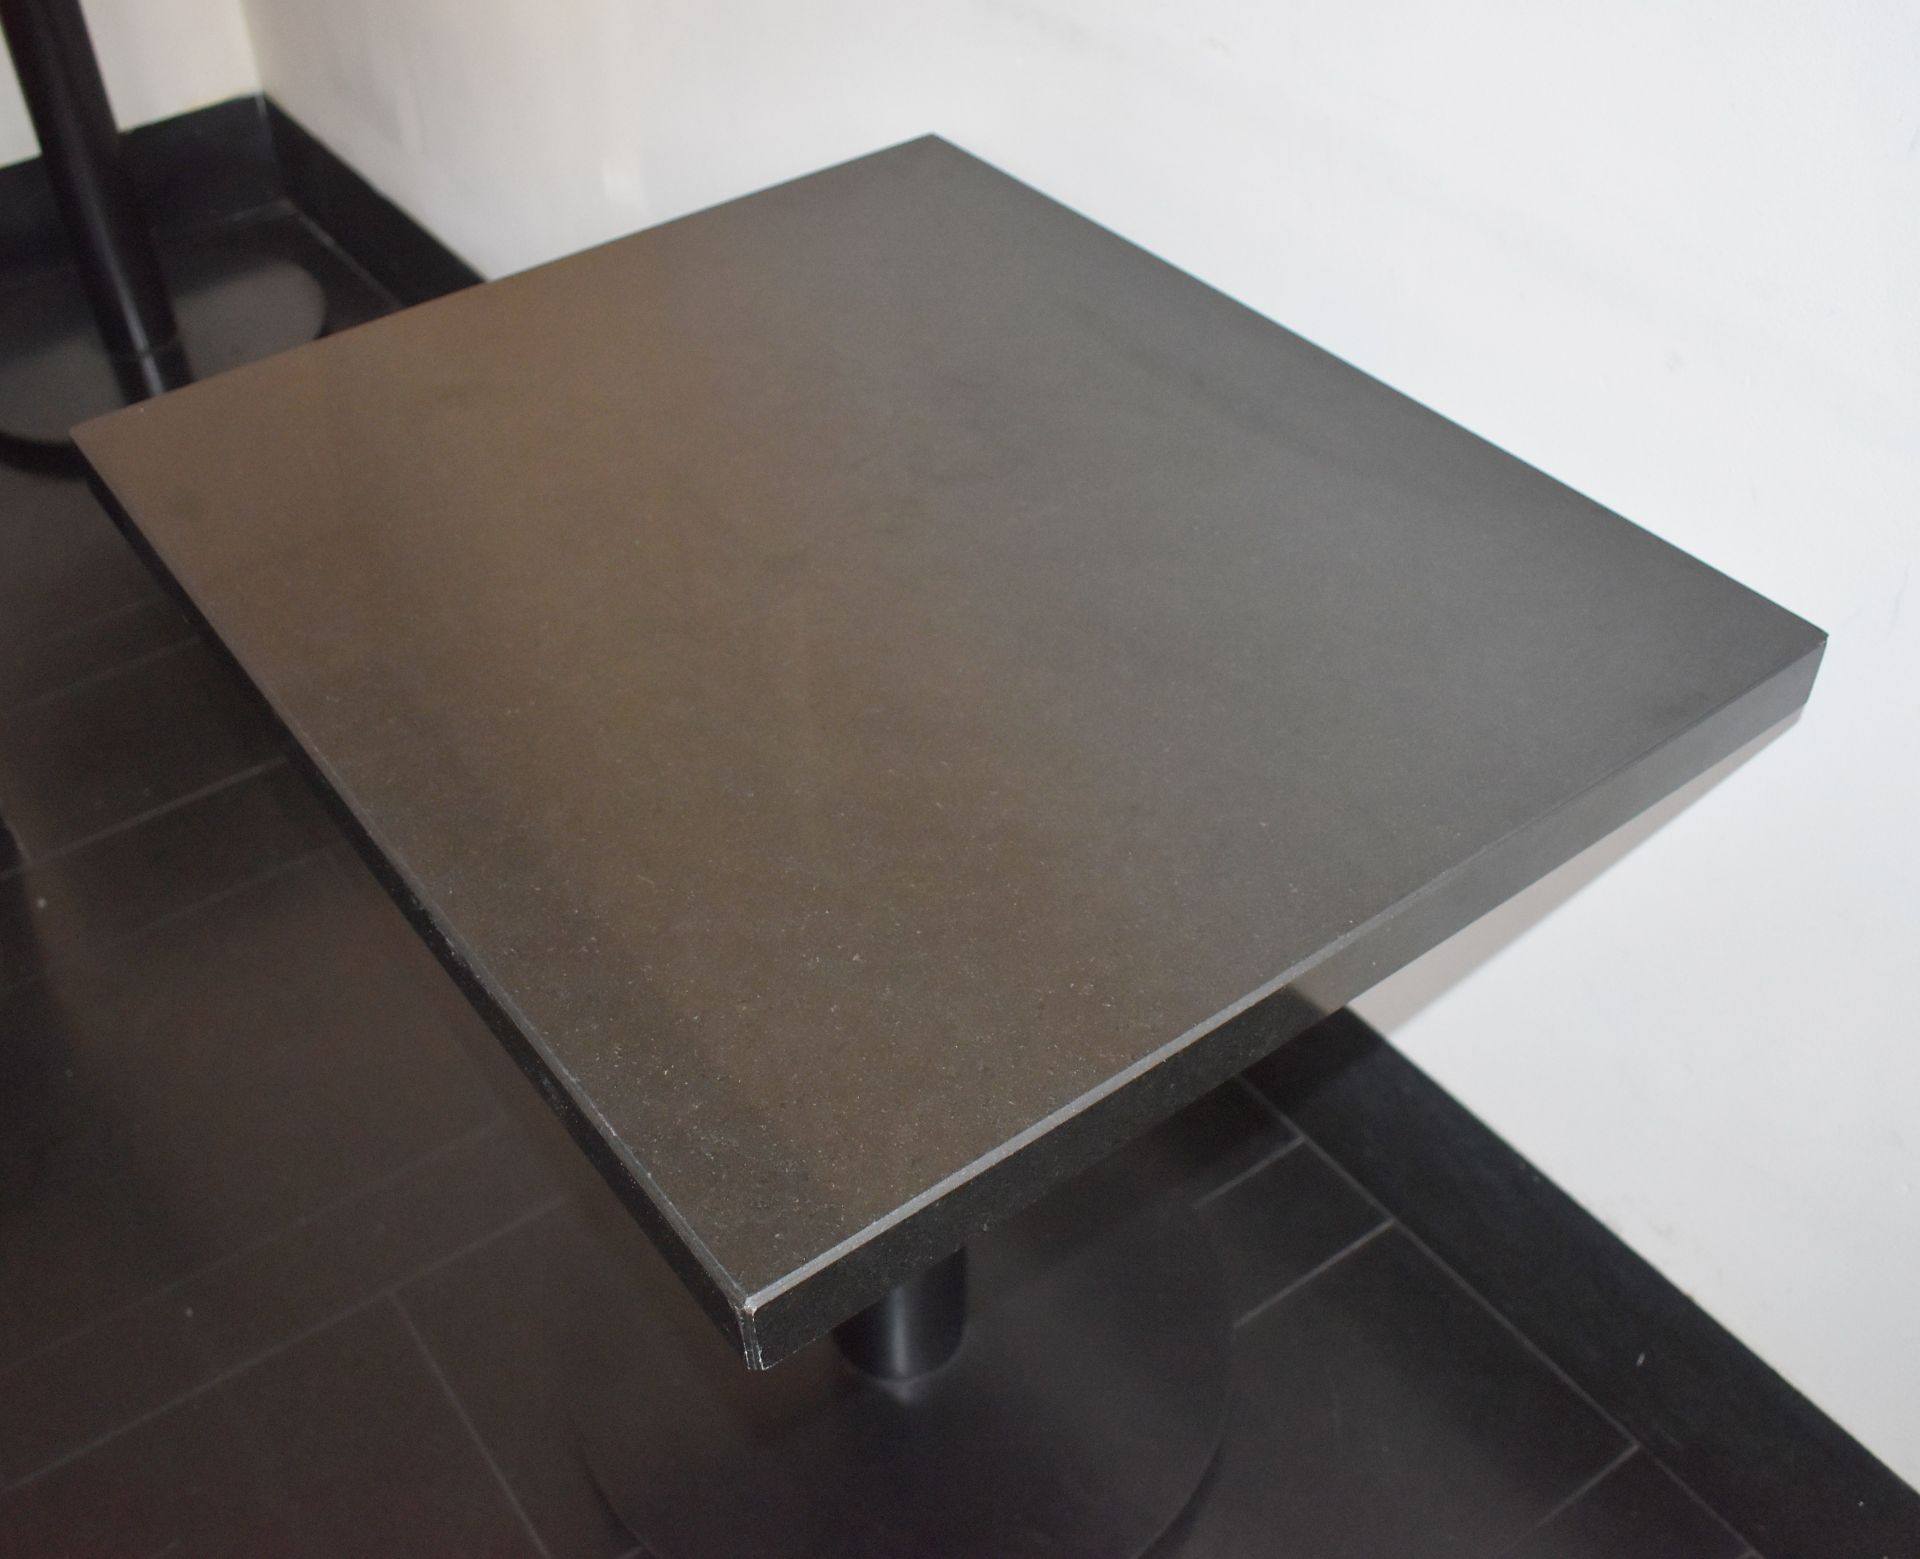 4 x Restaurant Bistro Tables With Granite Stone Tops and Substantial Metal Bases - Dimensions: H77 x - Image 2 of 7